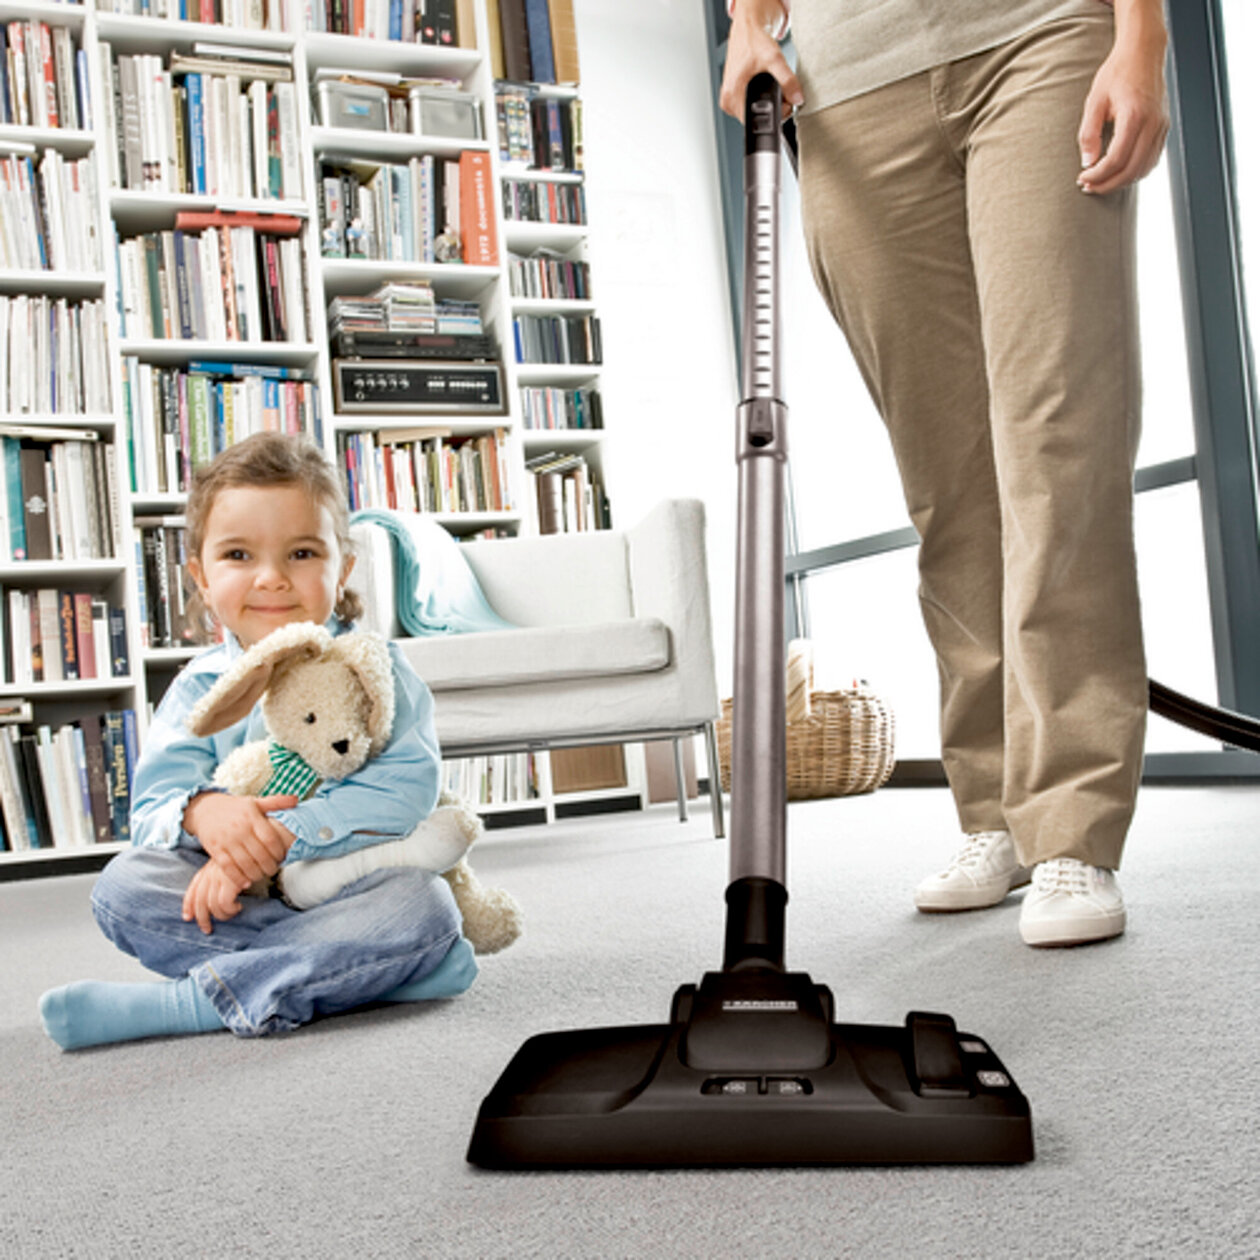 Vacuum cleaner VC 3: Multi-cyclone technology